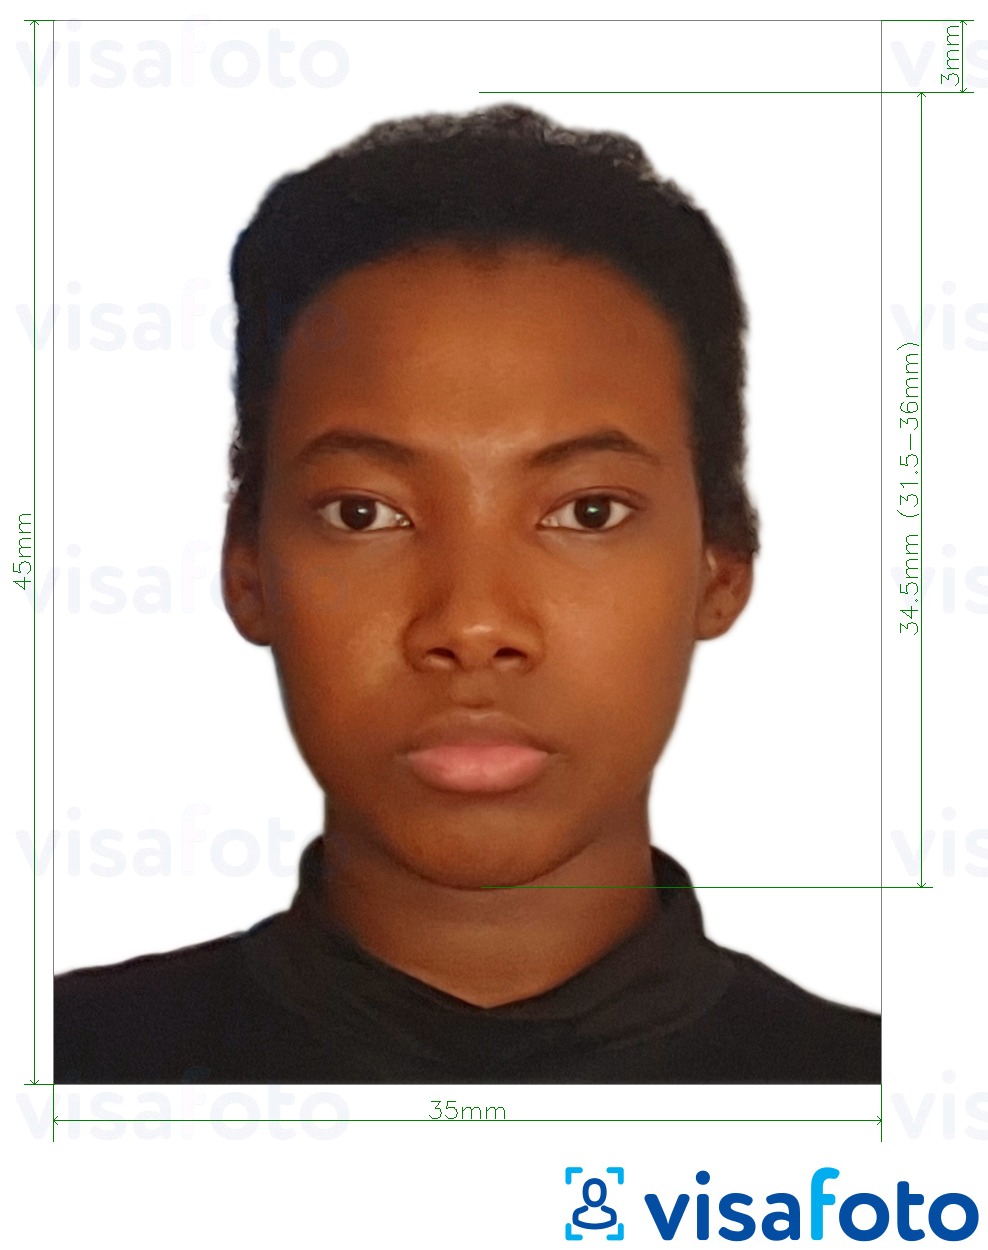 Example of photo for Ghana visa 3.5x4.5 cm (35x45 mm) with exact size specification